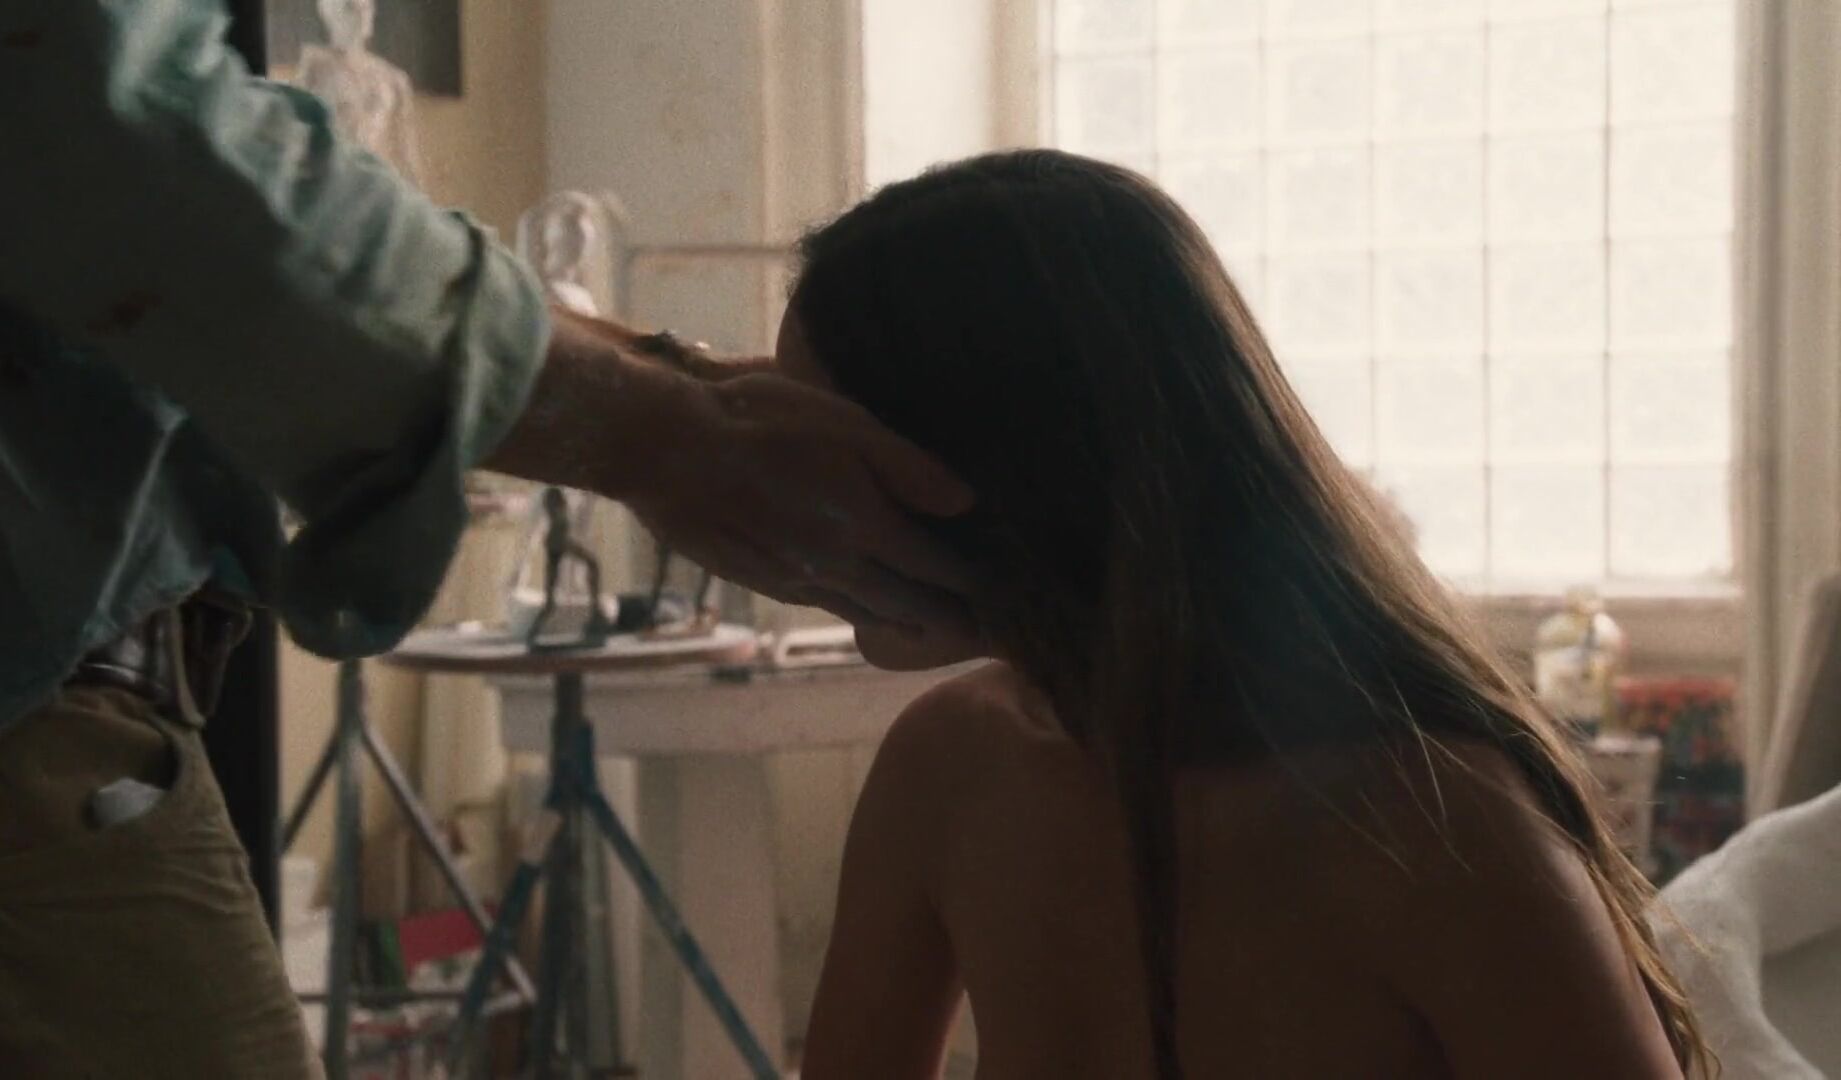 18QT Nude moment from feature film where hot actress Olivia Wilde exposes her skinny body Phat Ass